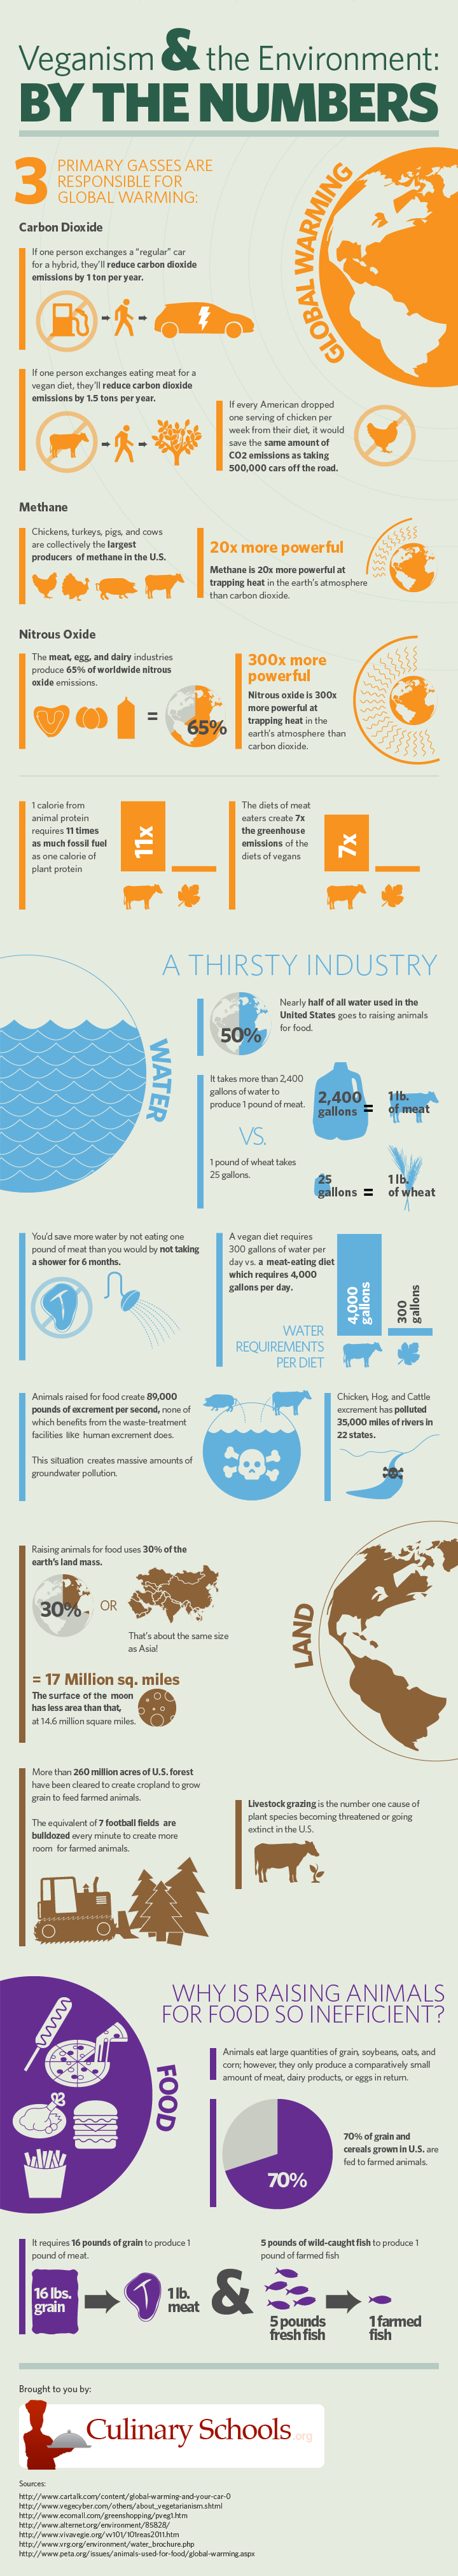 Why Veganism is Healthy for the Environment - Infographic